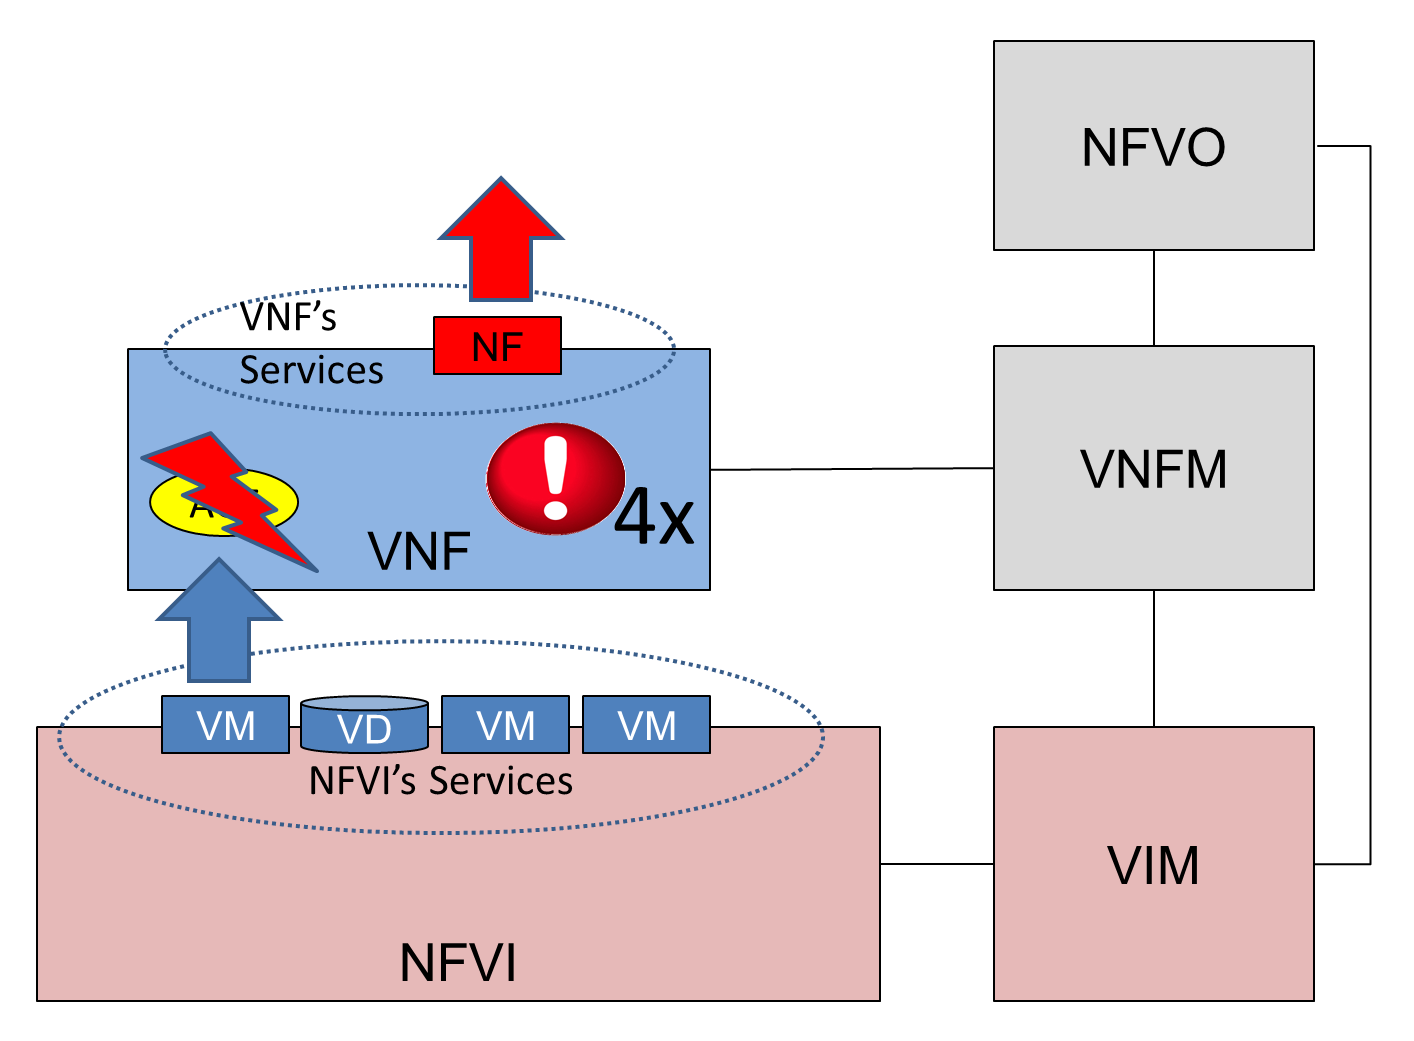 Repeated VNFC failure in a stateless VNF with no redundancy